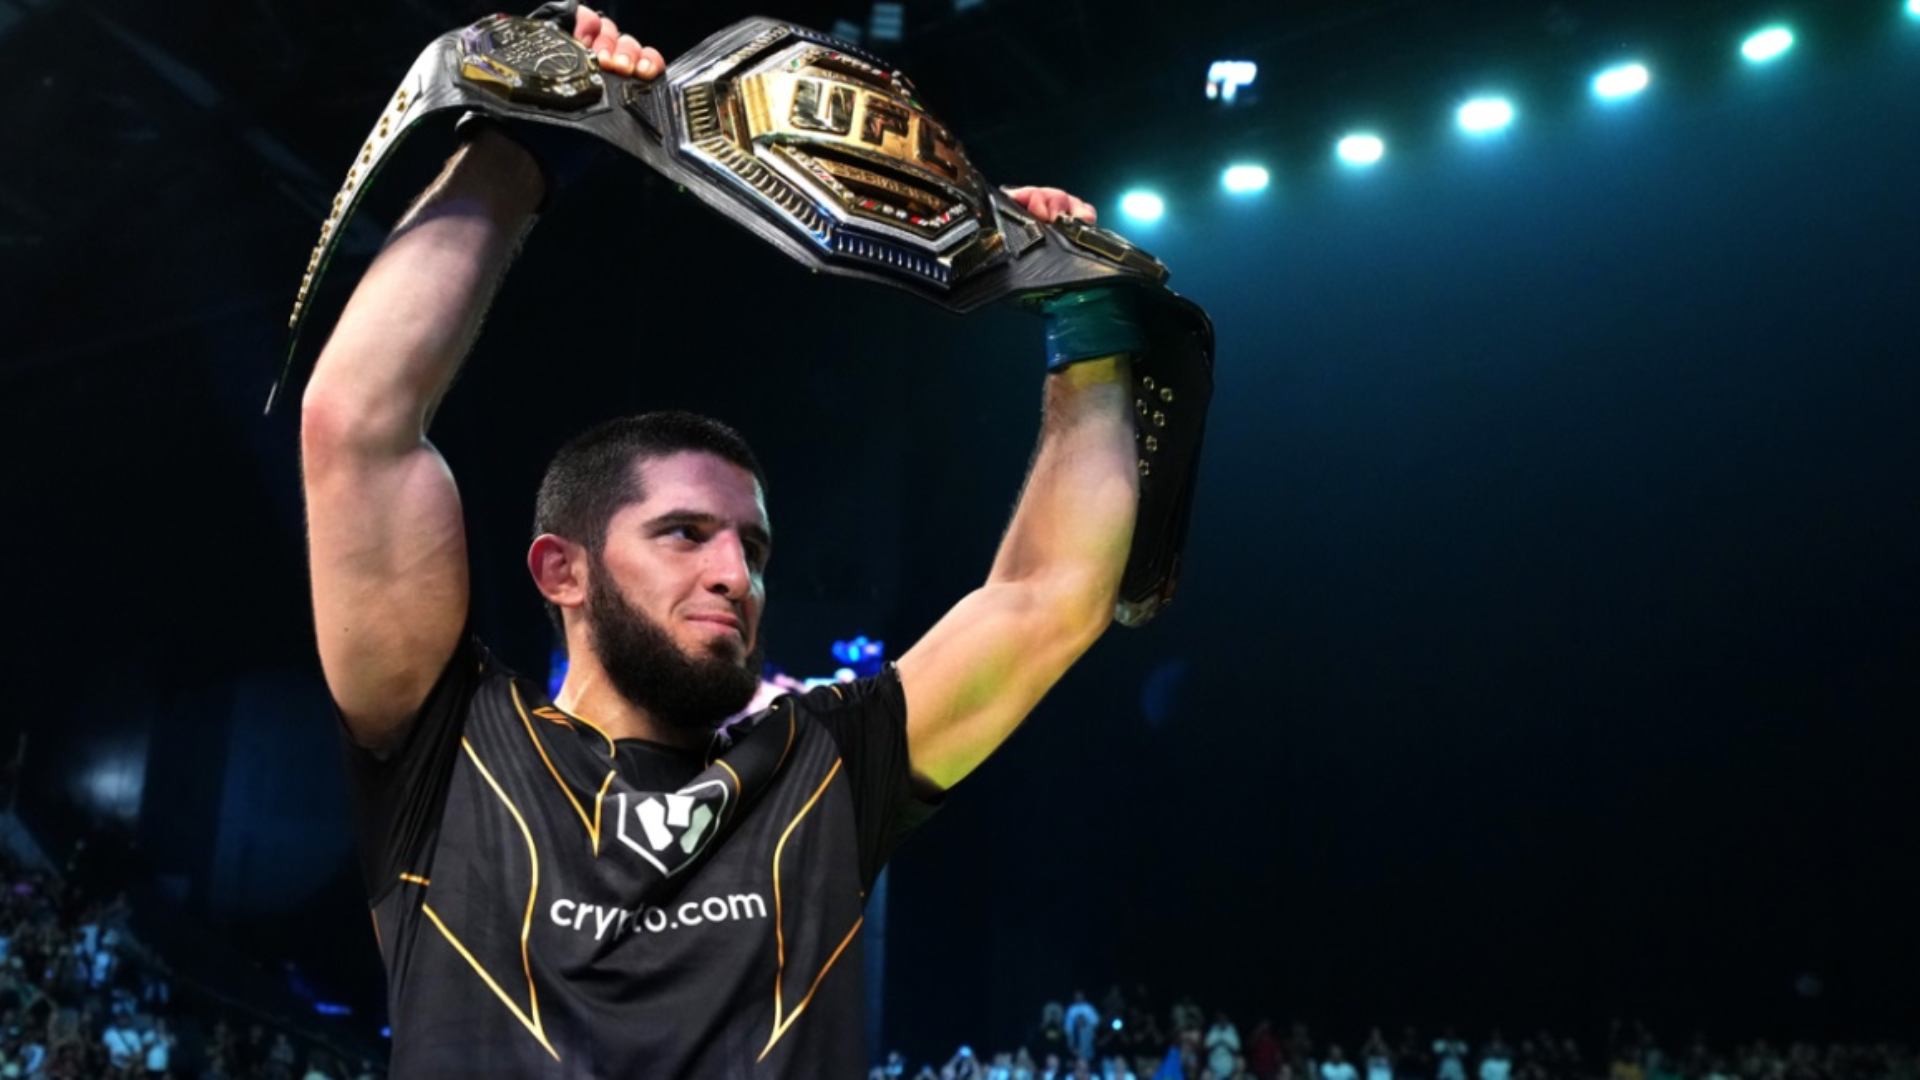 What is Islam Makhachev's Networth 2023, Earnings, Endorsements